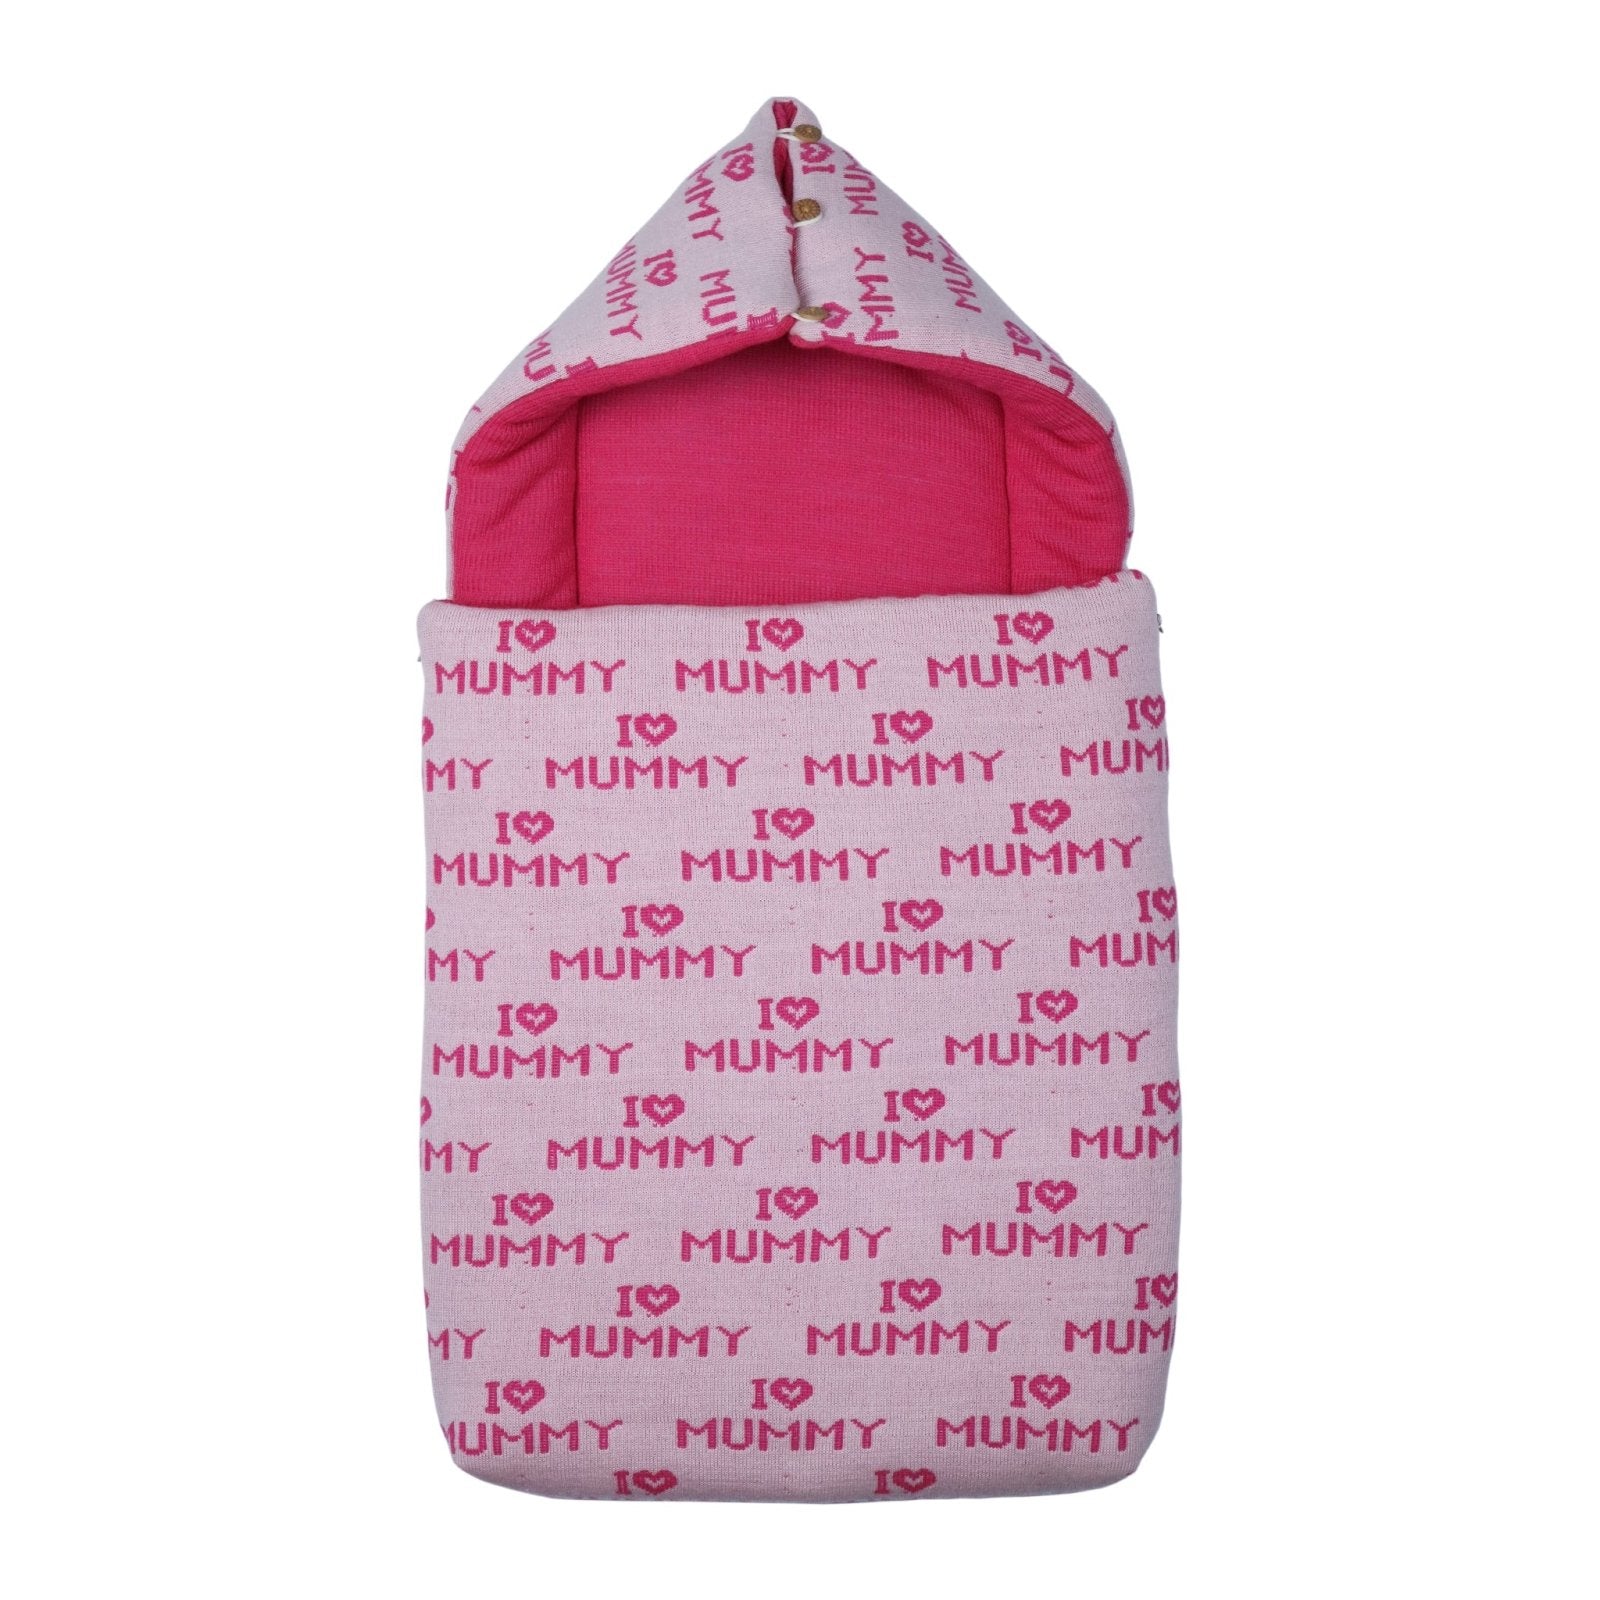 Carry Nest Hood with Pillow I Love Mummy by Little Darling